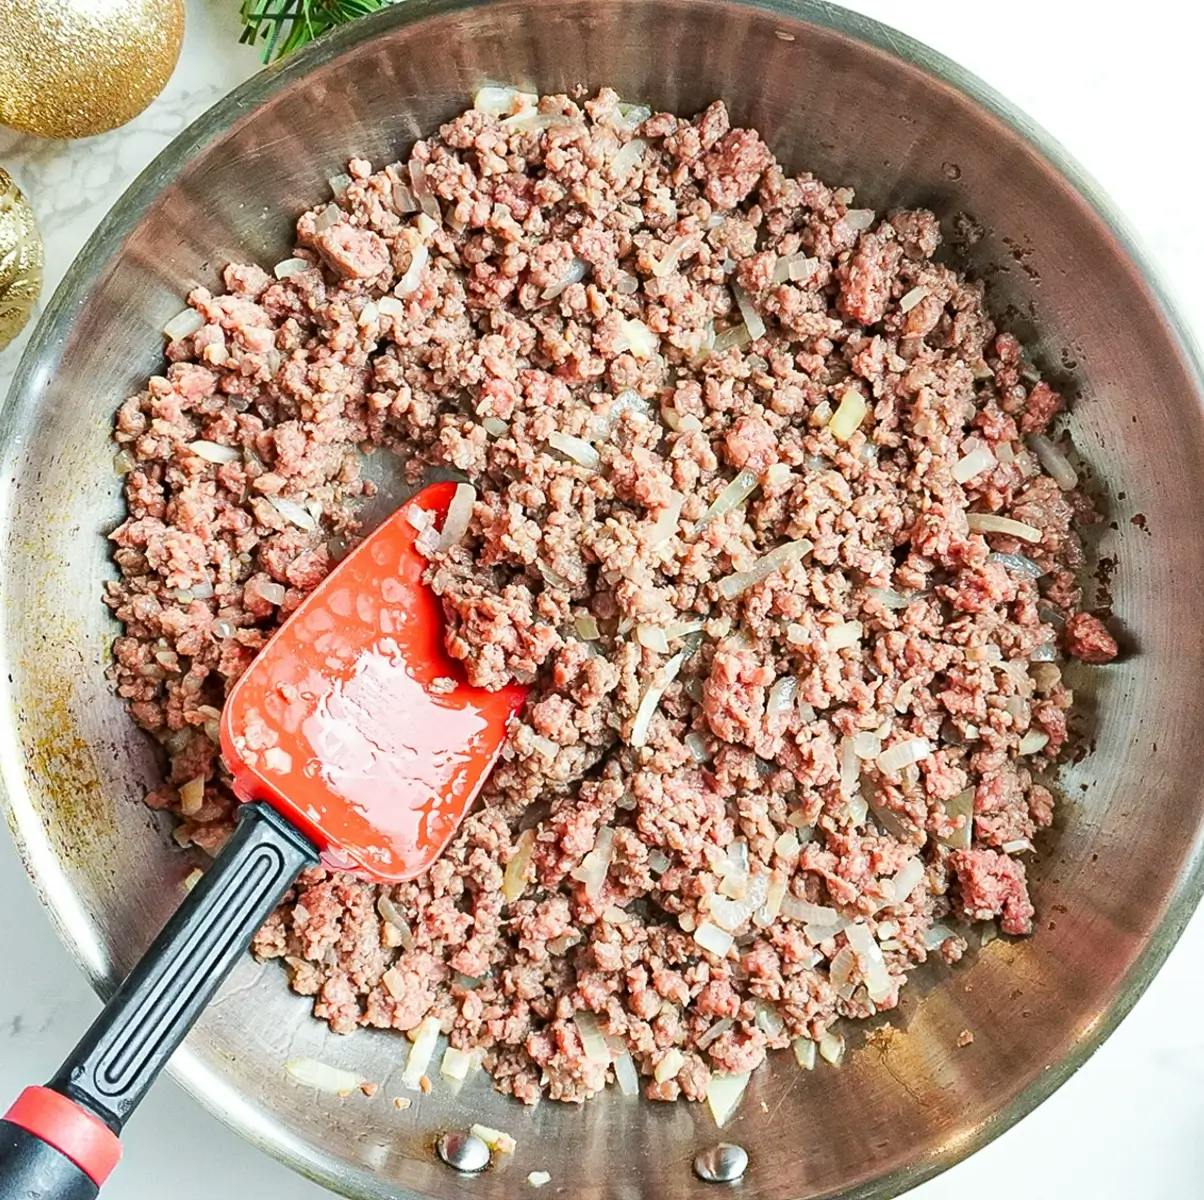 Cooking vegan ground beef ready for the sauce of a vegetarian lasagna recipe.